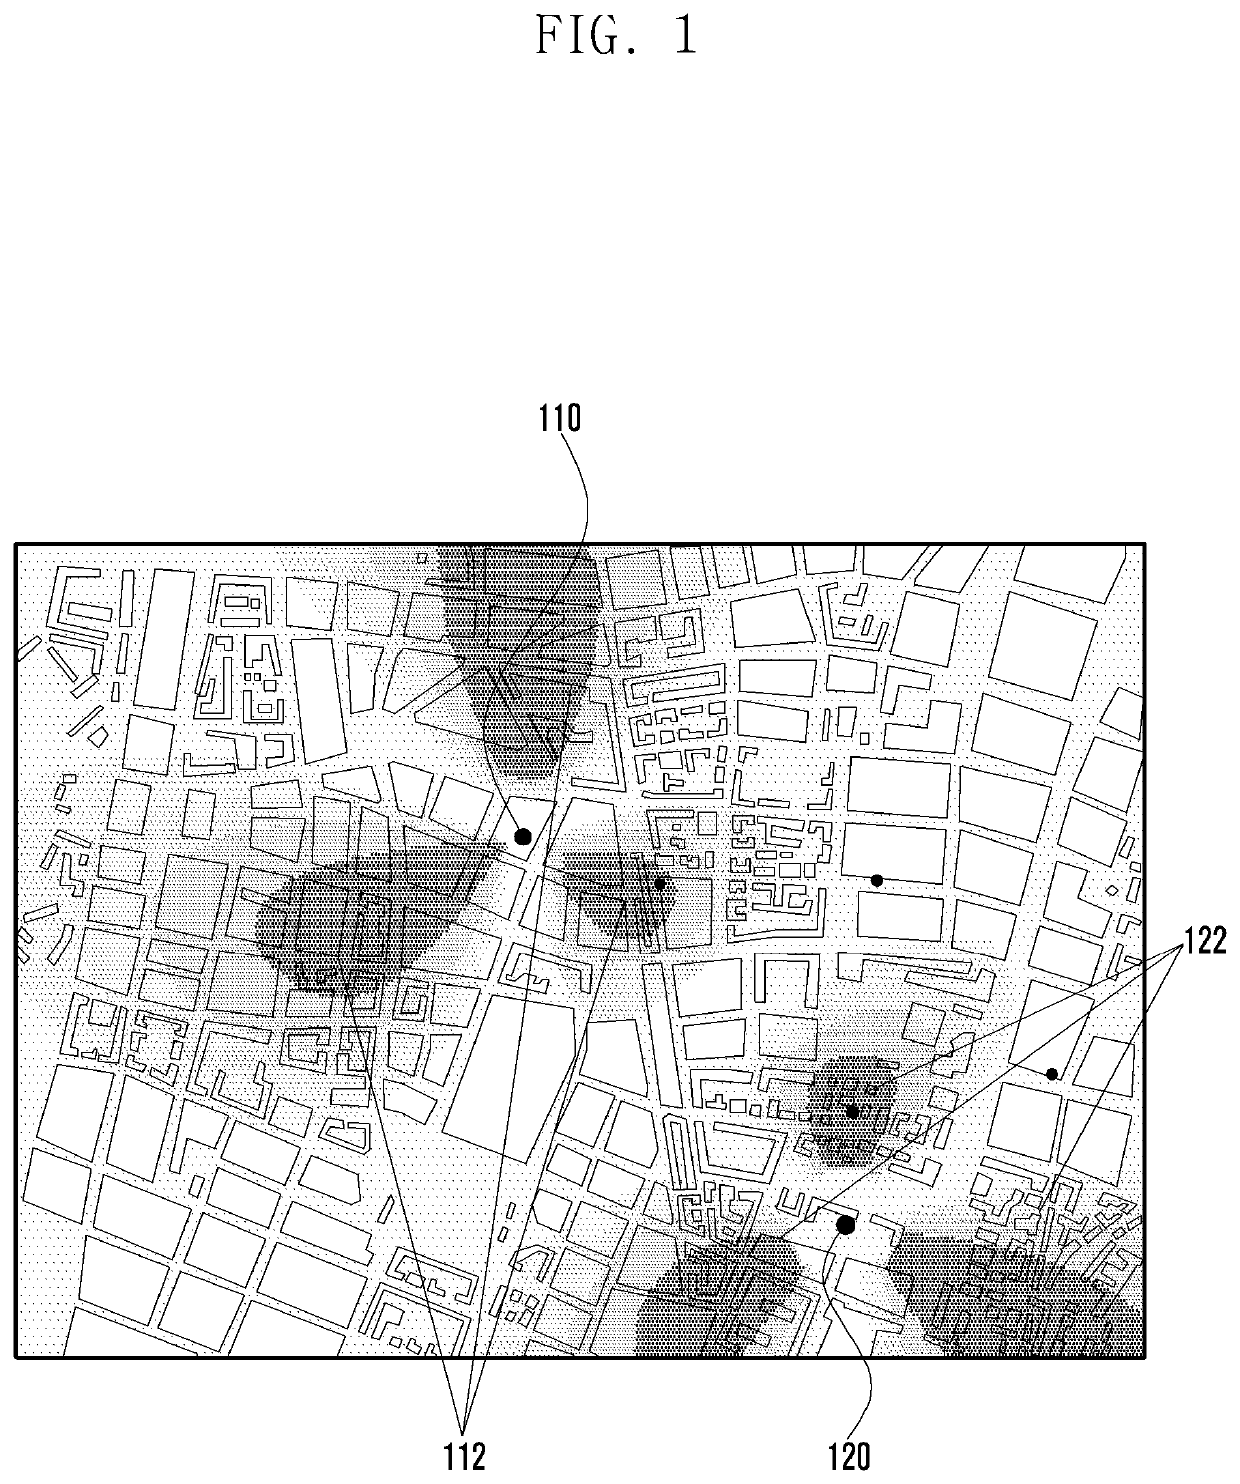 Method and device for analyzing communication channels and designing wireless networks, in consideration of information relating to real environments